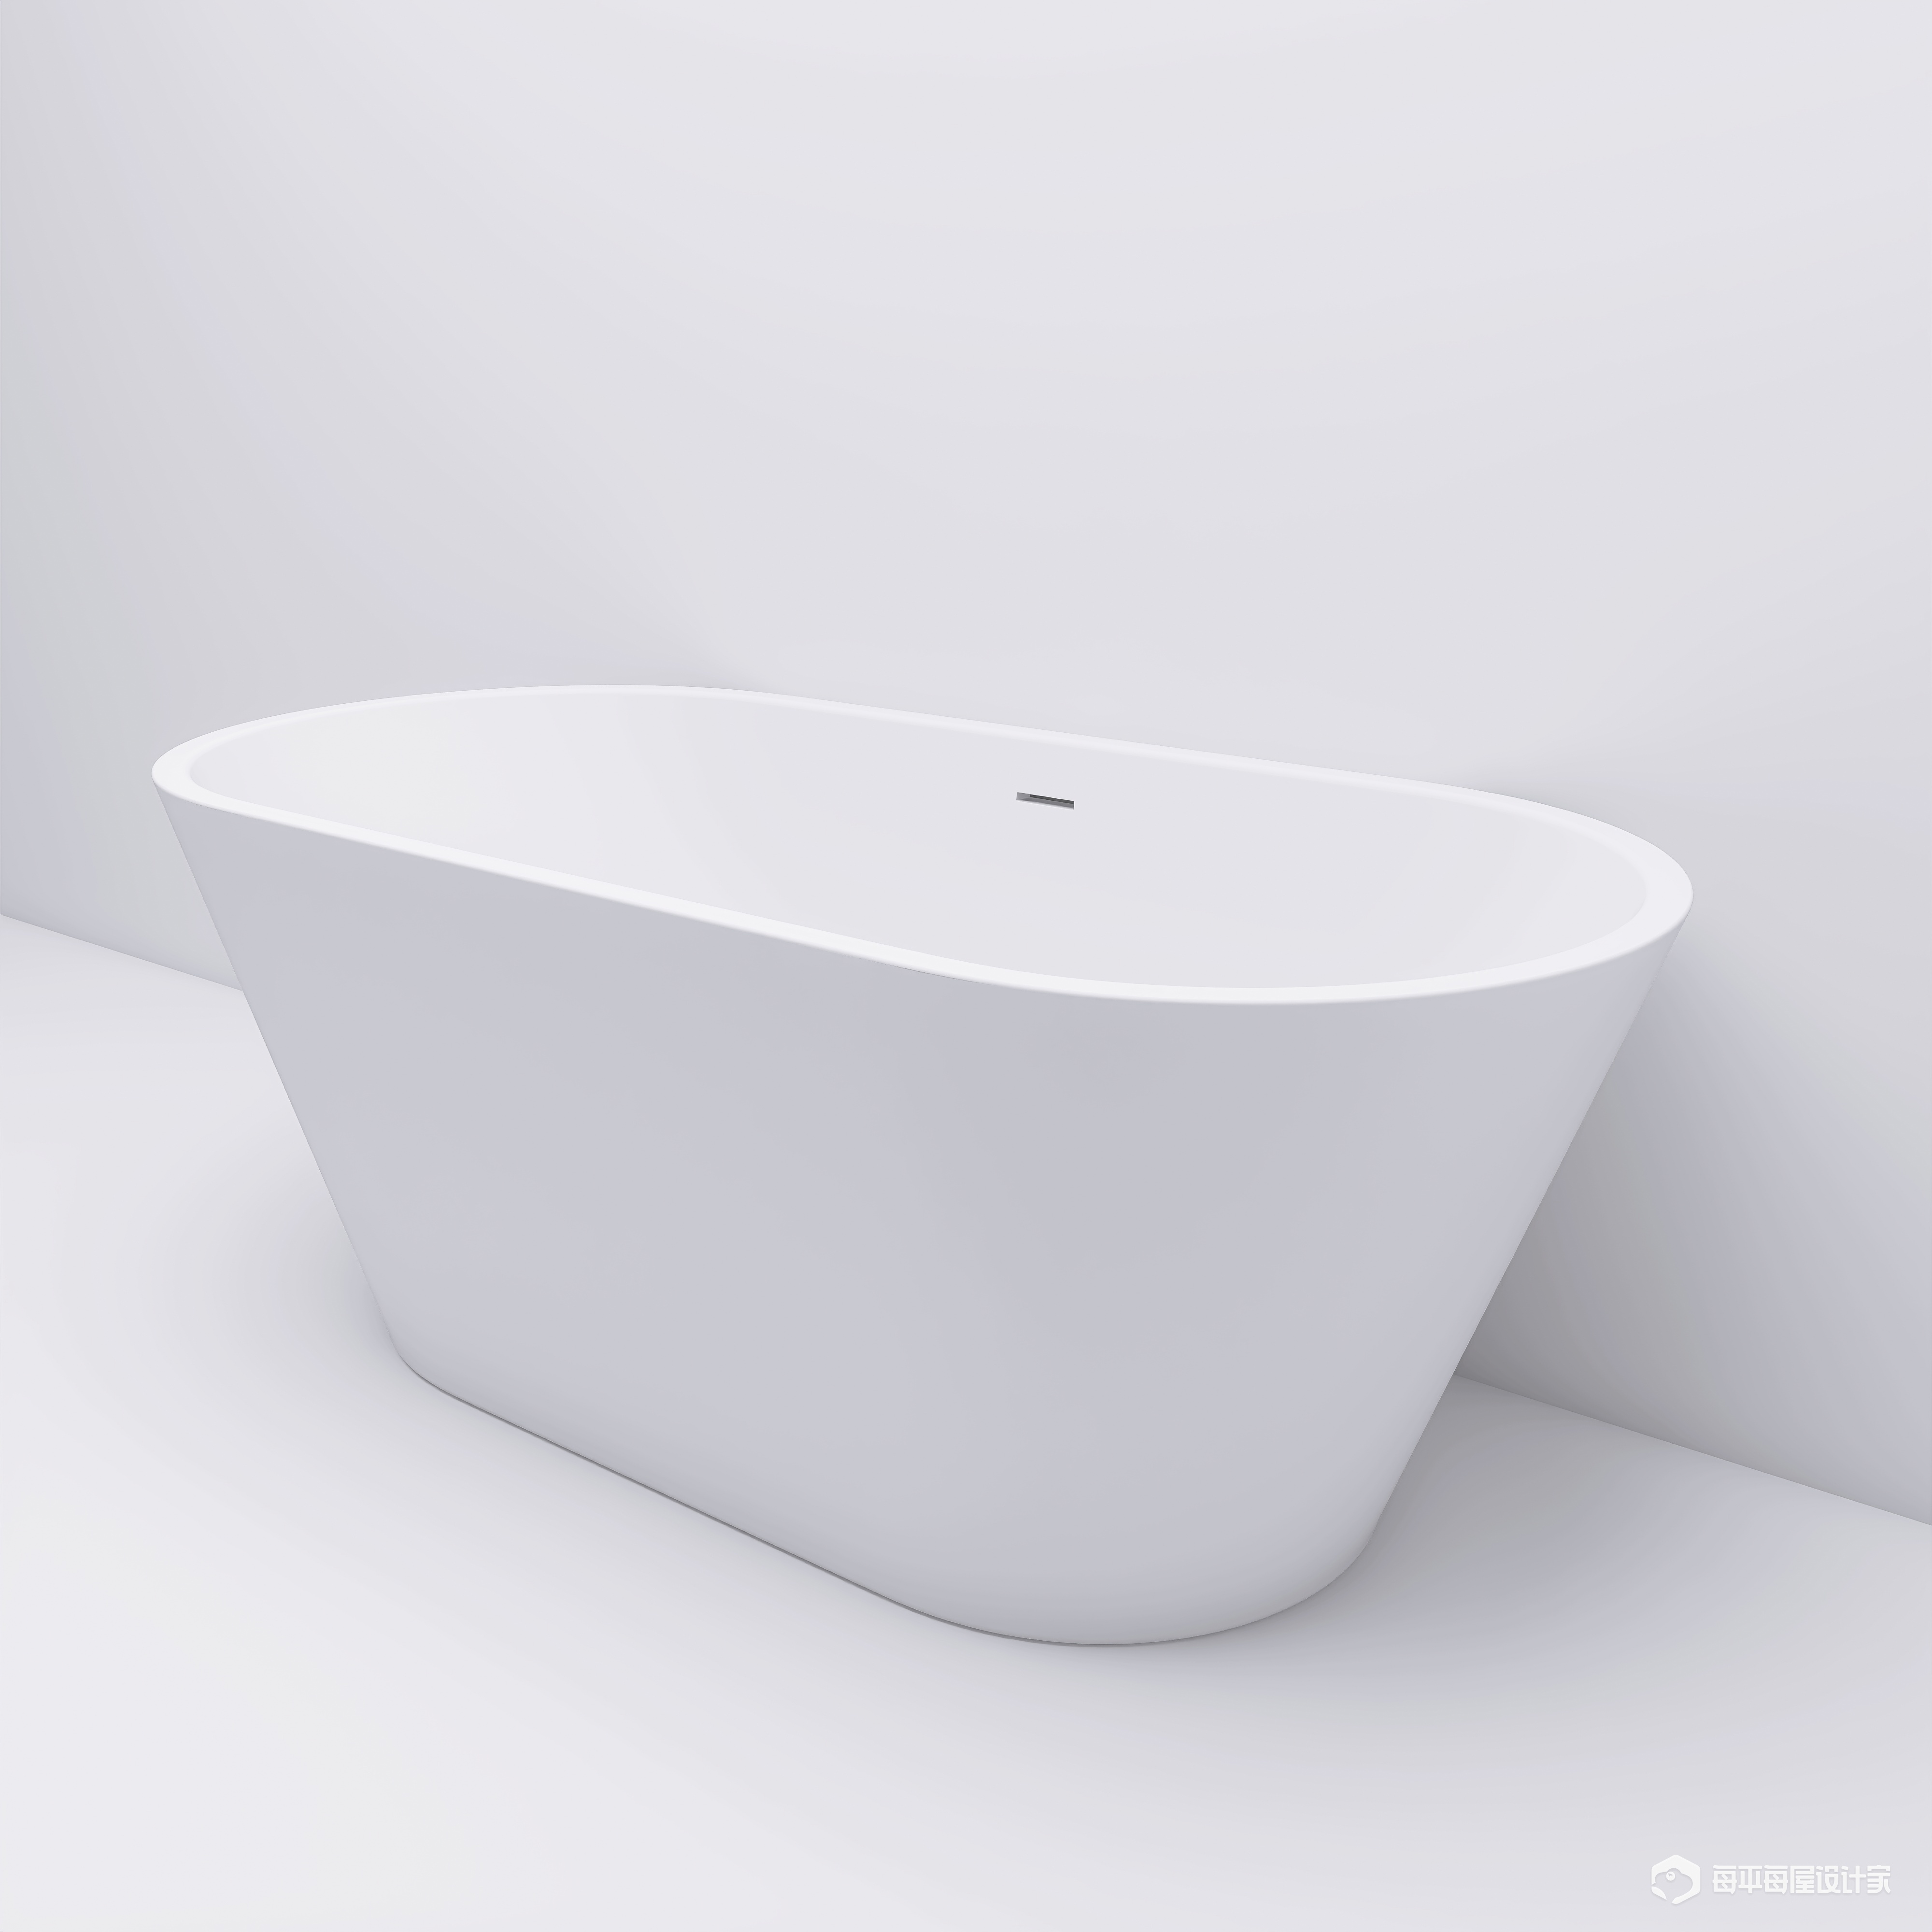 63 inches Acrylic Free Standing Tub  Classic Oval Shape Soaking Tub, Adjustable Freestanding Bathtub with Integrated Slotted Overflow and Chrome Pop-up Drain Anti-clogging Gloss White